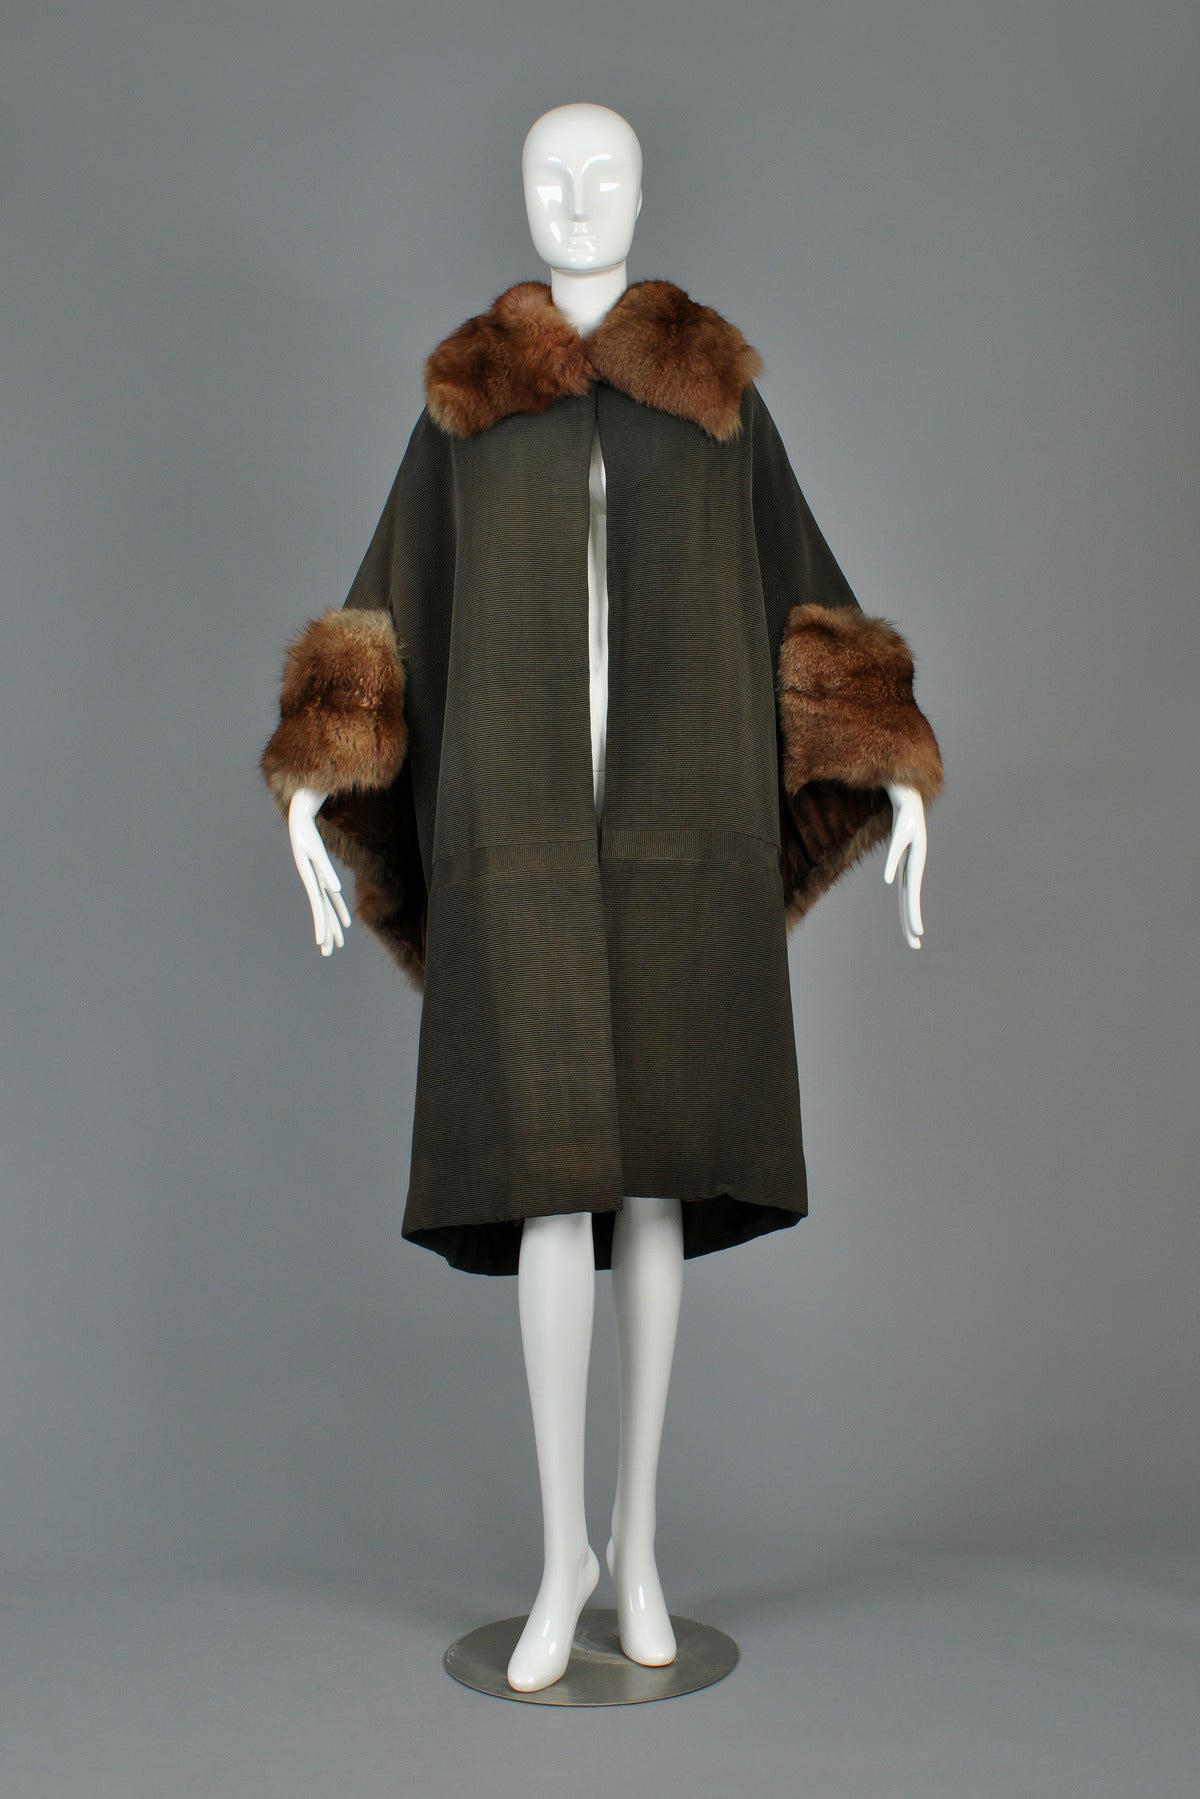 Just reduced $2200 to $1100

Beautiful dark cocoa colored coat, dating to the teens or very early twenties. Super rare find, especially considering this piece in very very pristine condition with only one tiny mark on the shoulder. It truly looks